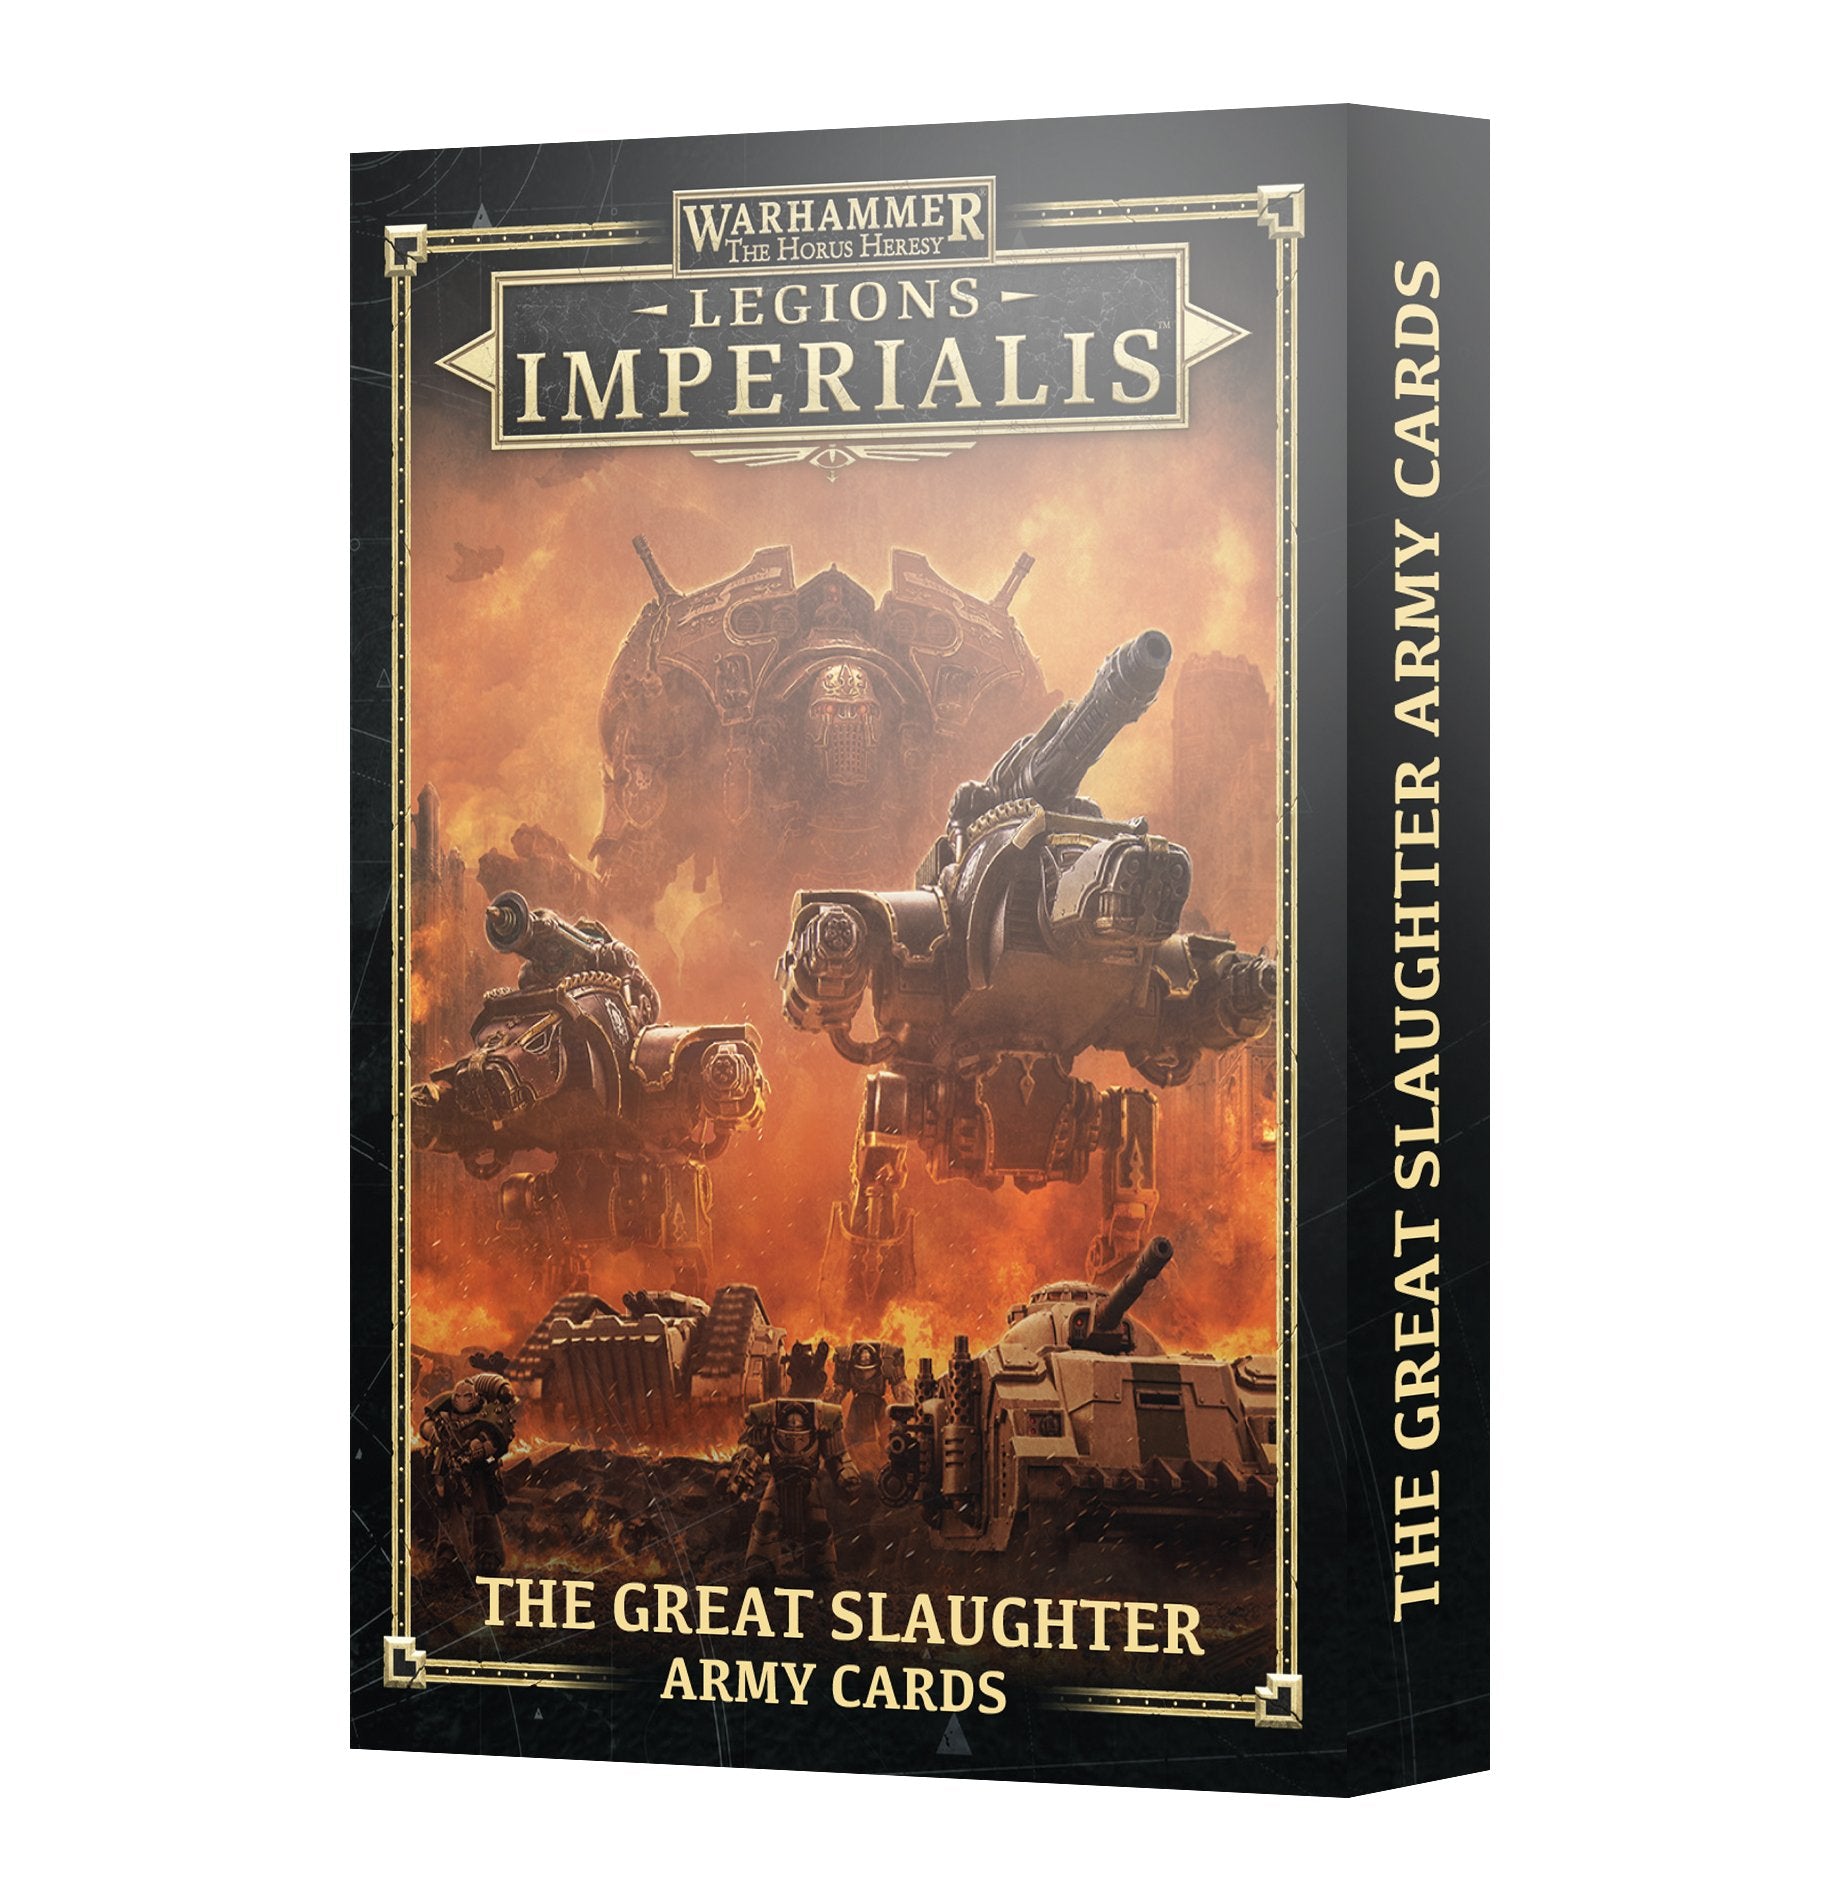 Legions Imperialis: The Great Slaughter Army Cards - Release Date 2/3/24 - Loaded Dice